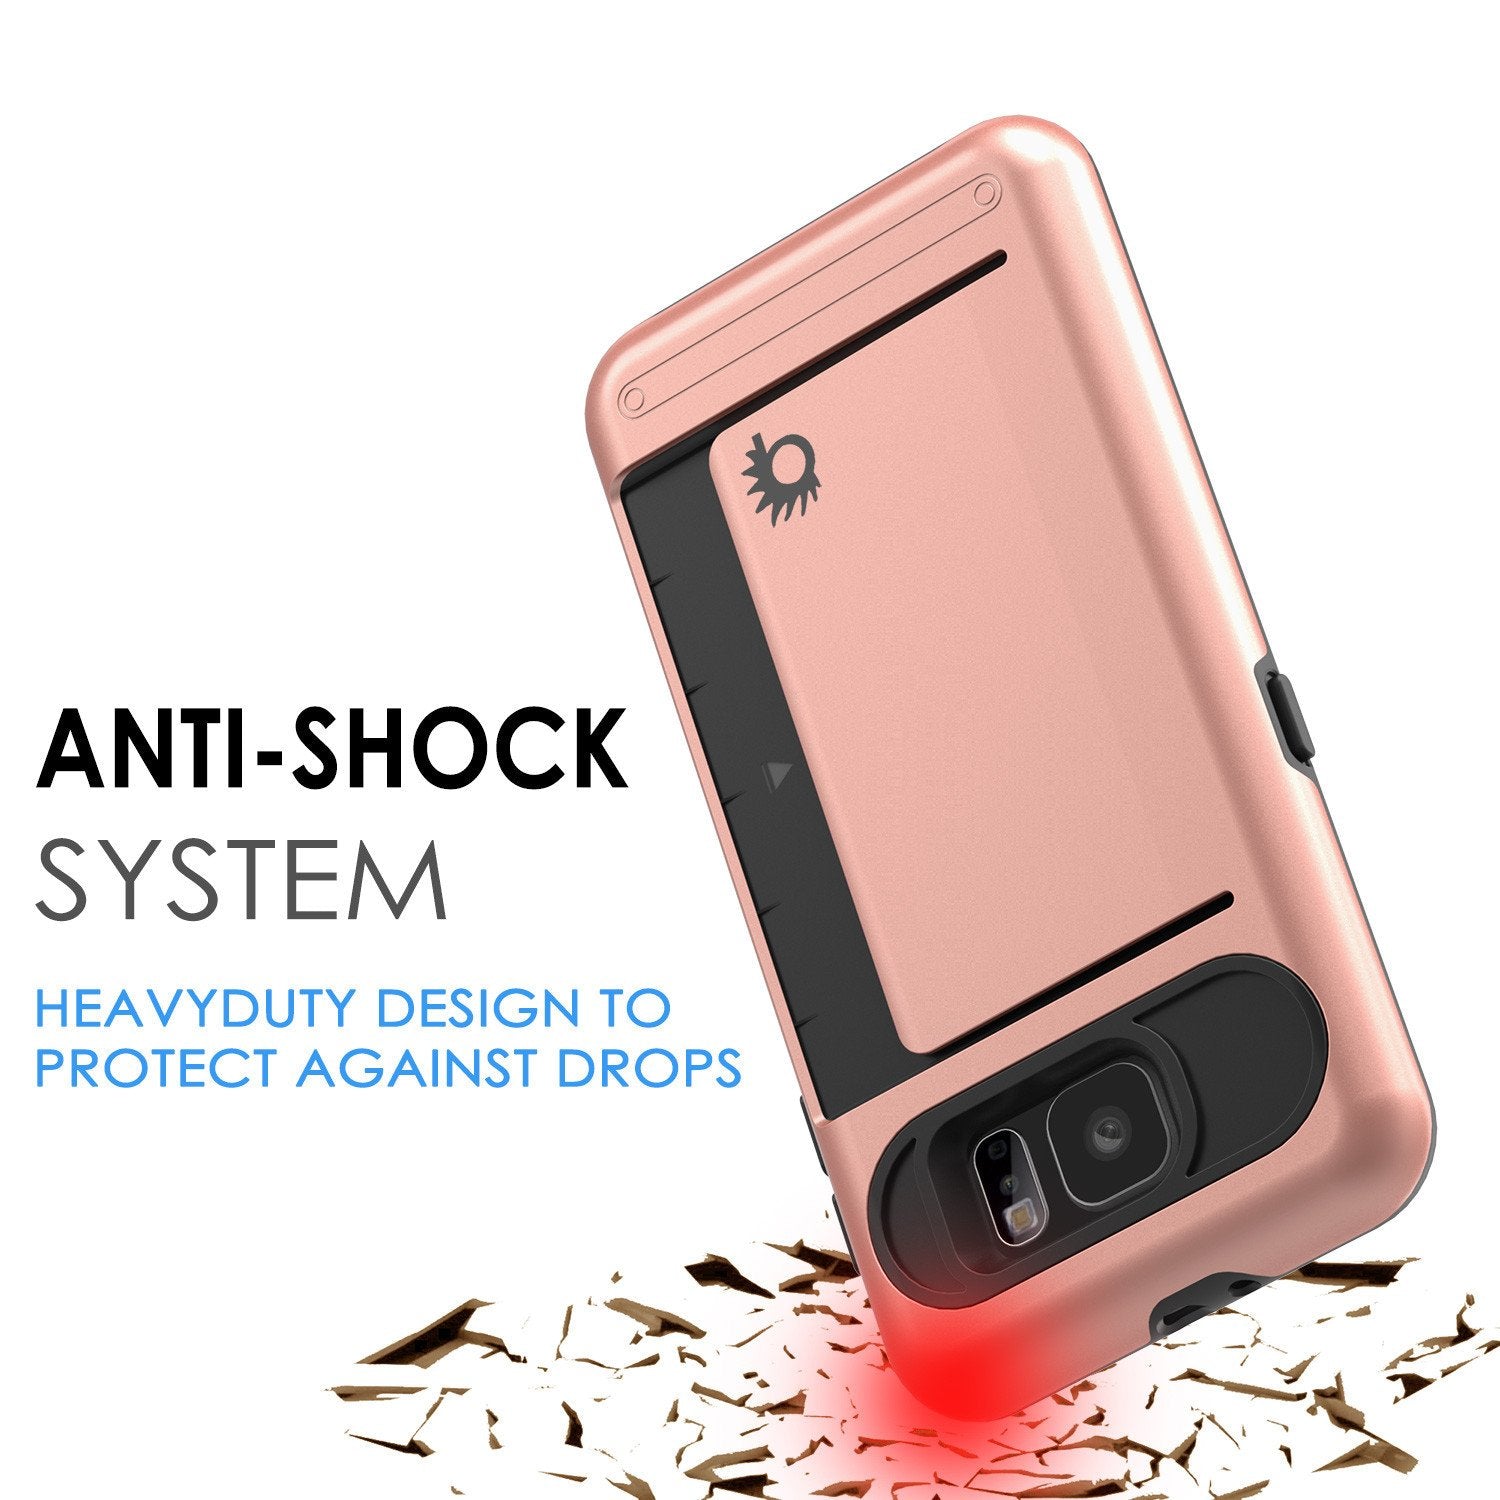 Galaxy S6 EDGE Plus Case PunkCase CLUTCH Rose Gold Series Slim Armor Soft Cover w/ Screen Protector - PunkCase NZ